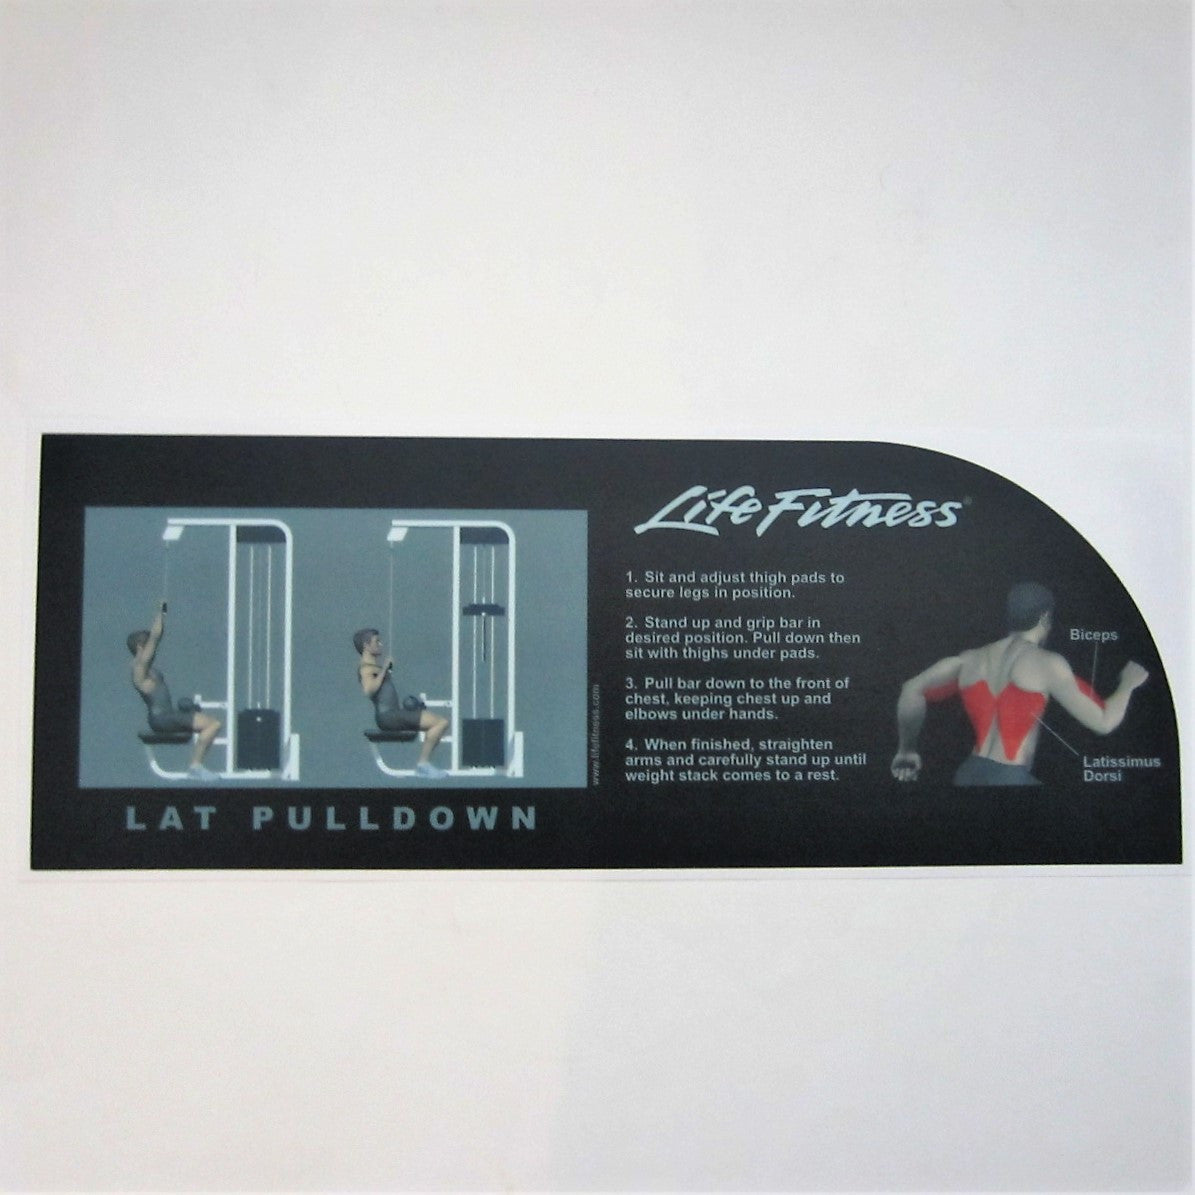 Lat Pulldown on the Machine - Instructions, Information